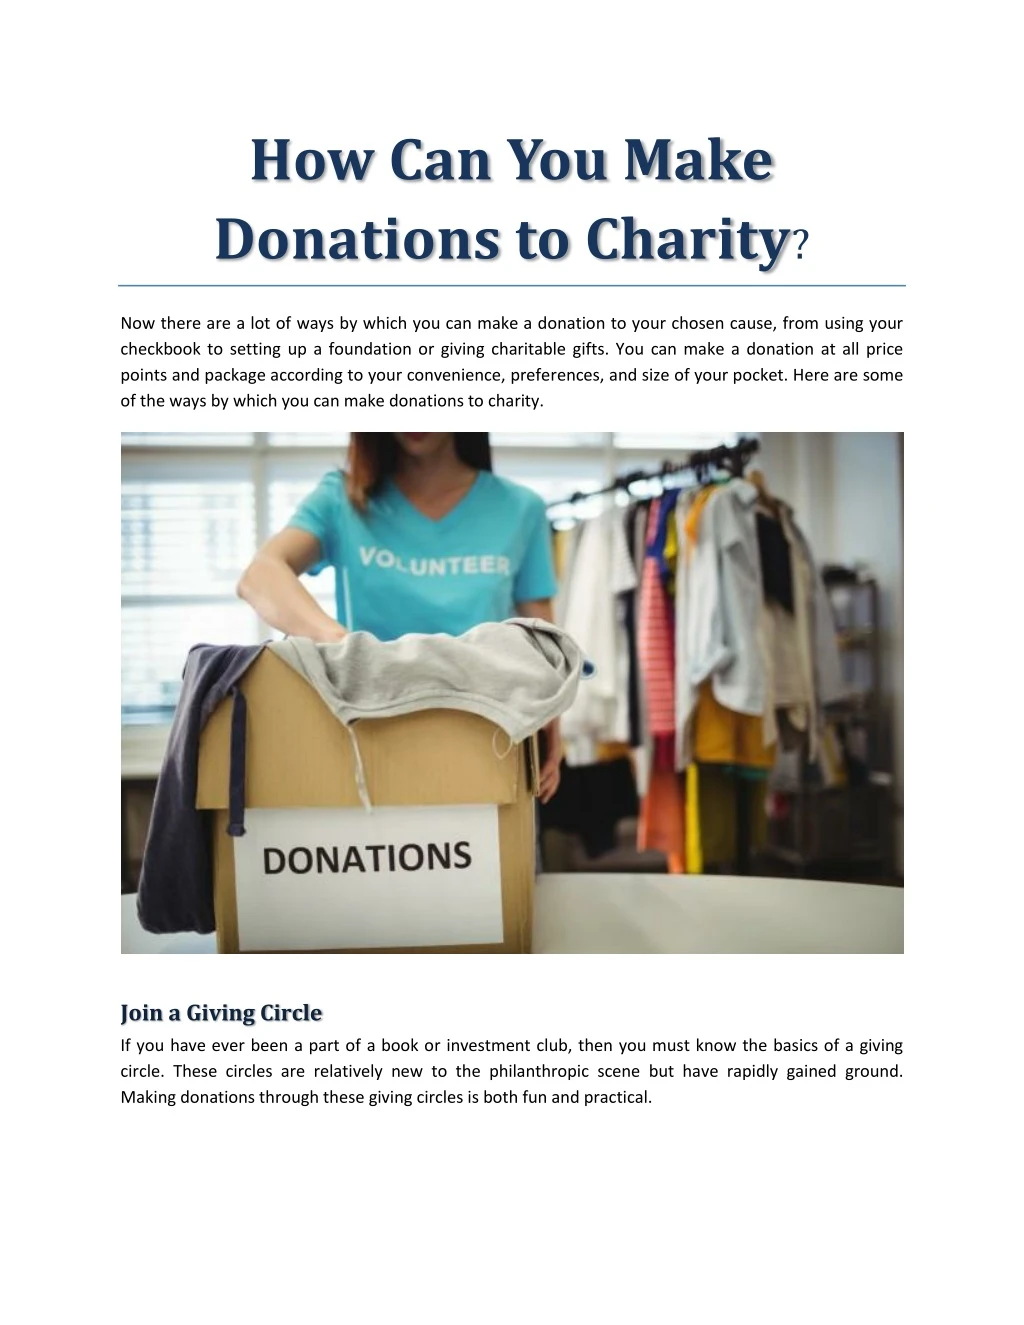 how can you make donations to charity